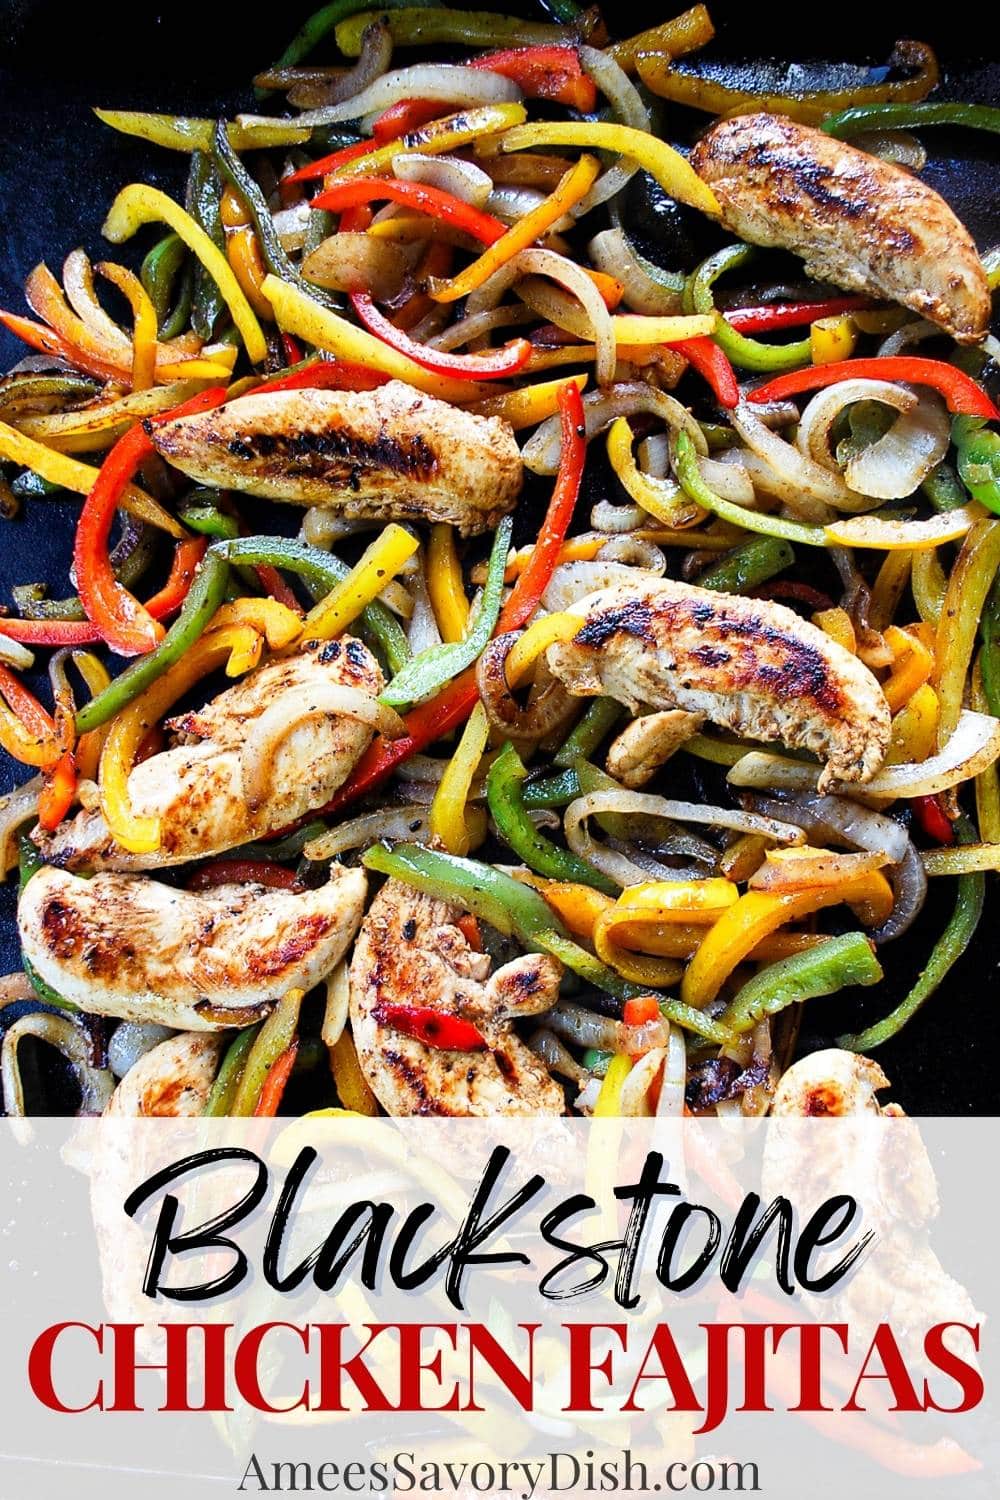 Blackstone Chicken Fajitas! This quick and easy recipe makes a batch of chicken fajitas complete with juicy, charred bell peppers and onions on a flat-top grill. via @Ameessavorydish